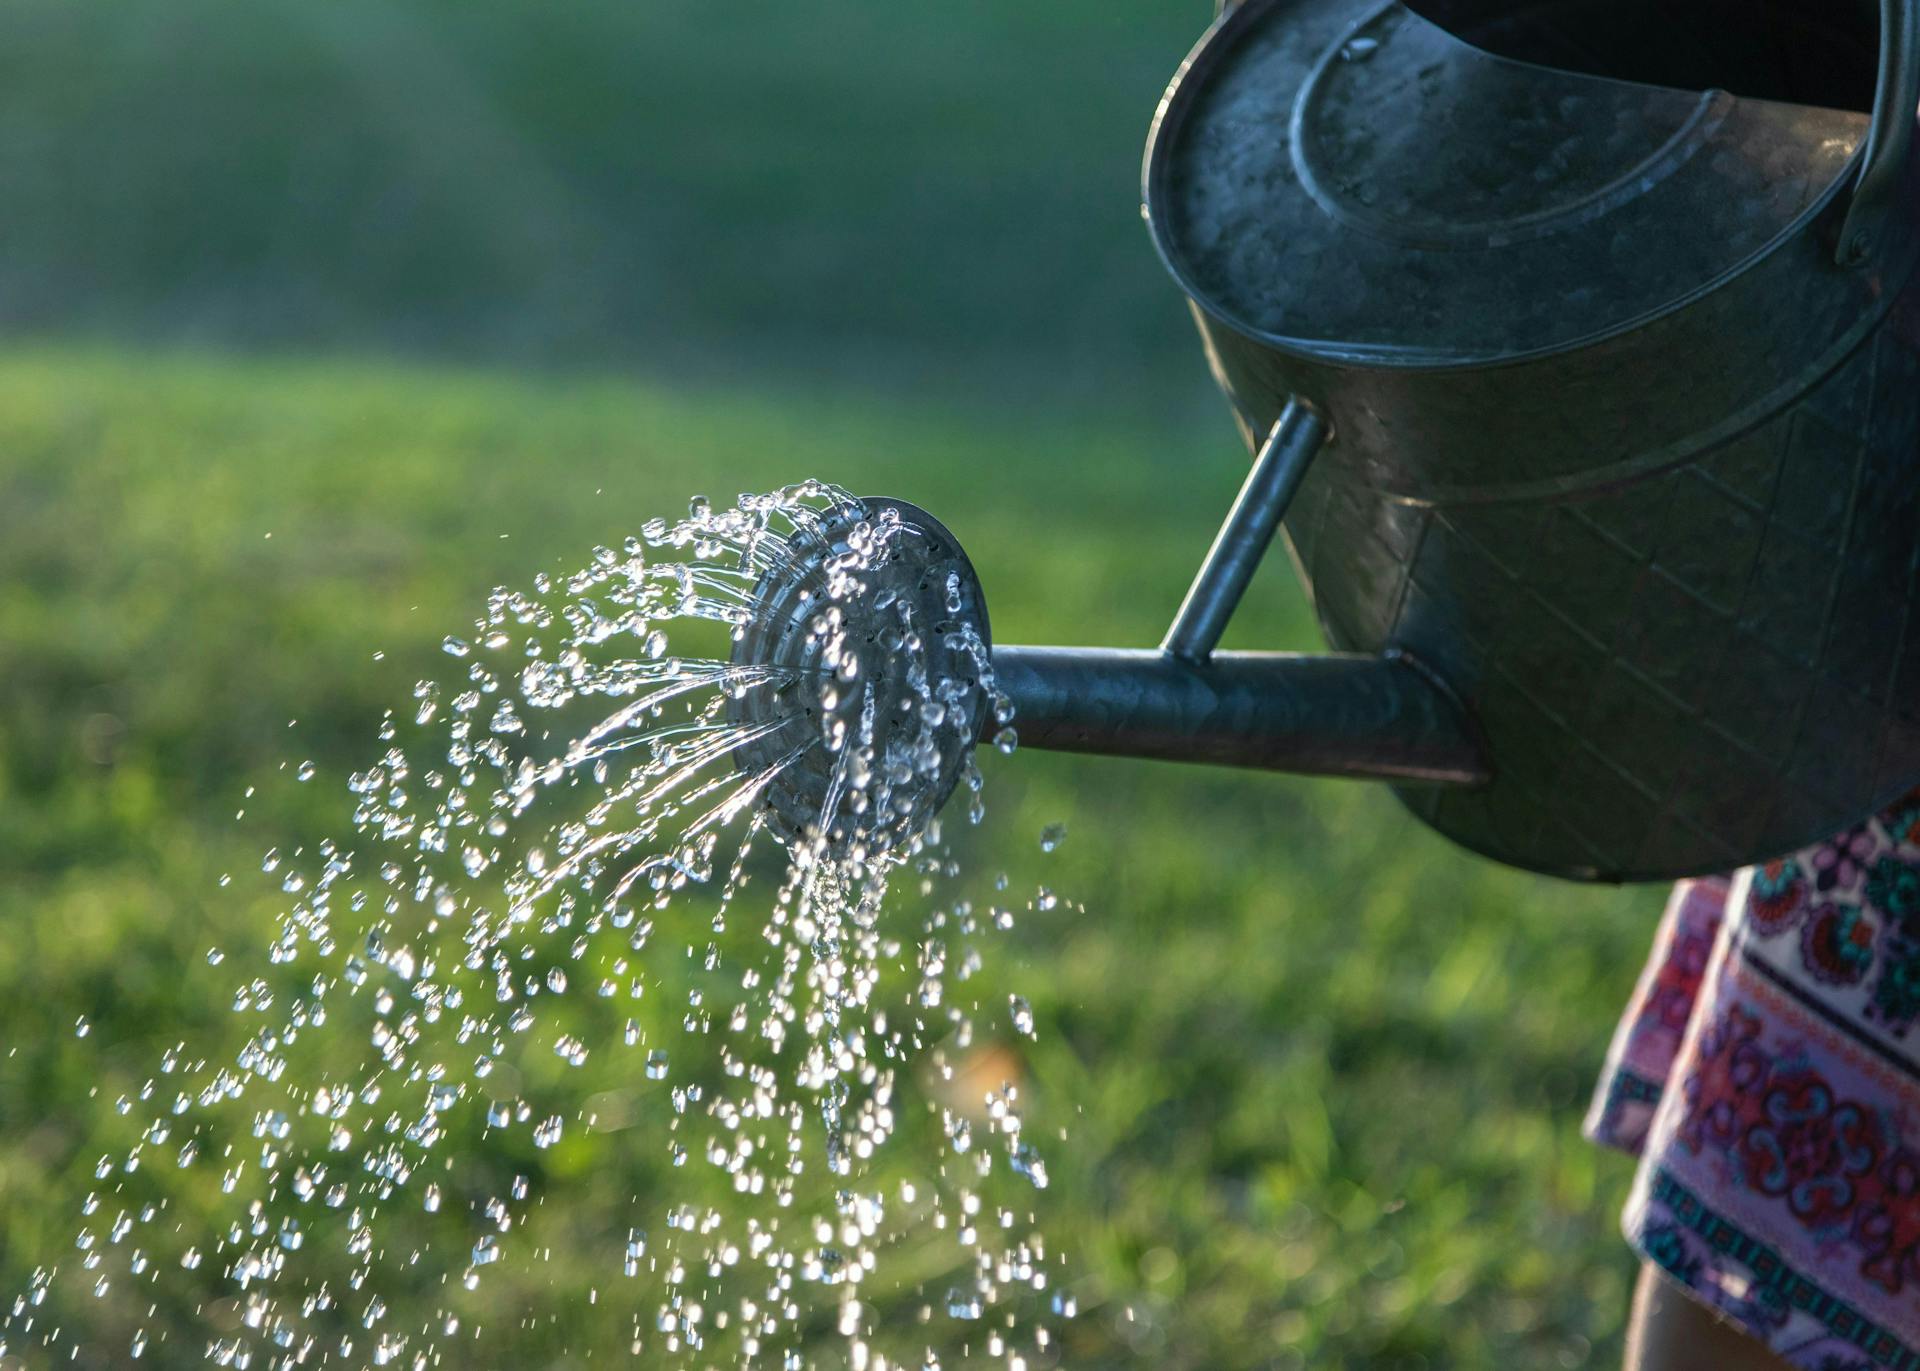 Watering can pouring out large water droplets onto green grassy field. Refreshing content is a continuing trend in content marketing.